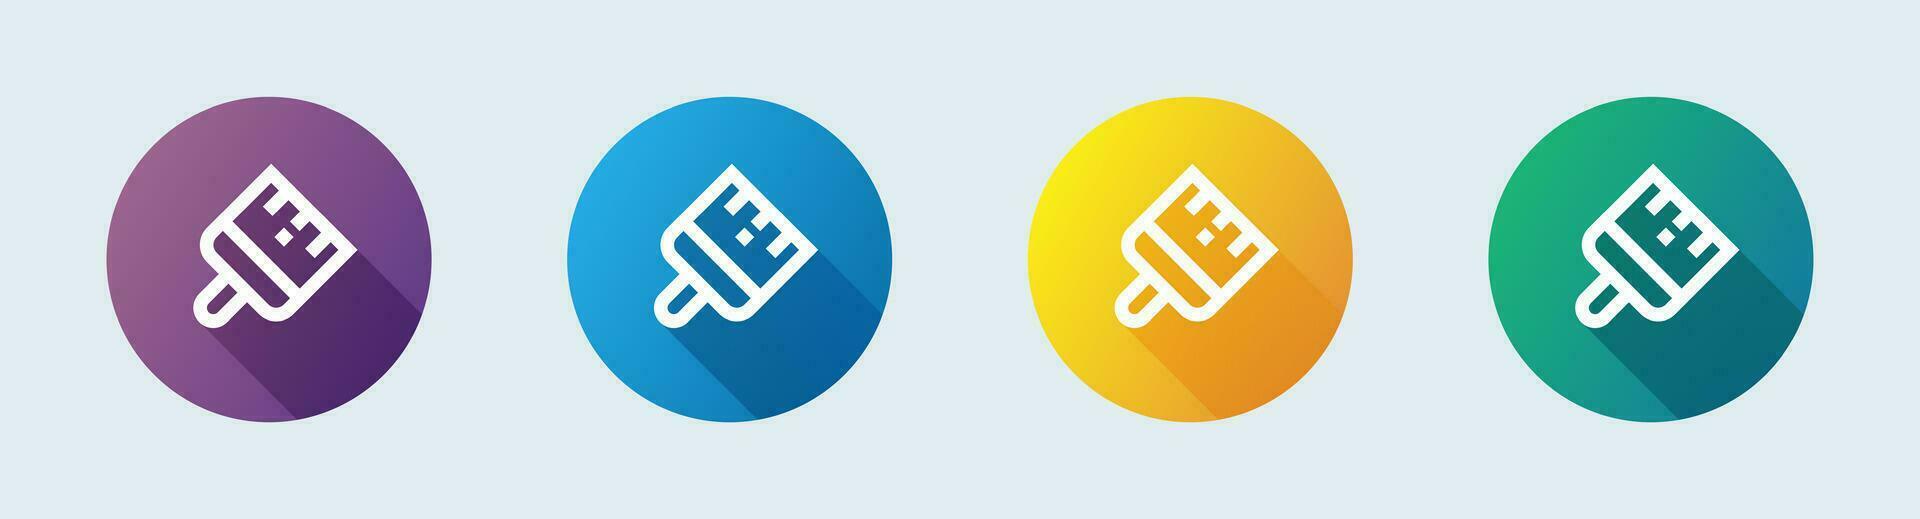 Brush line icon in flat design style. Paint signs vector illustration.